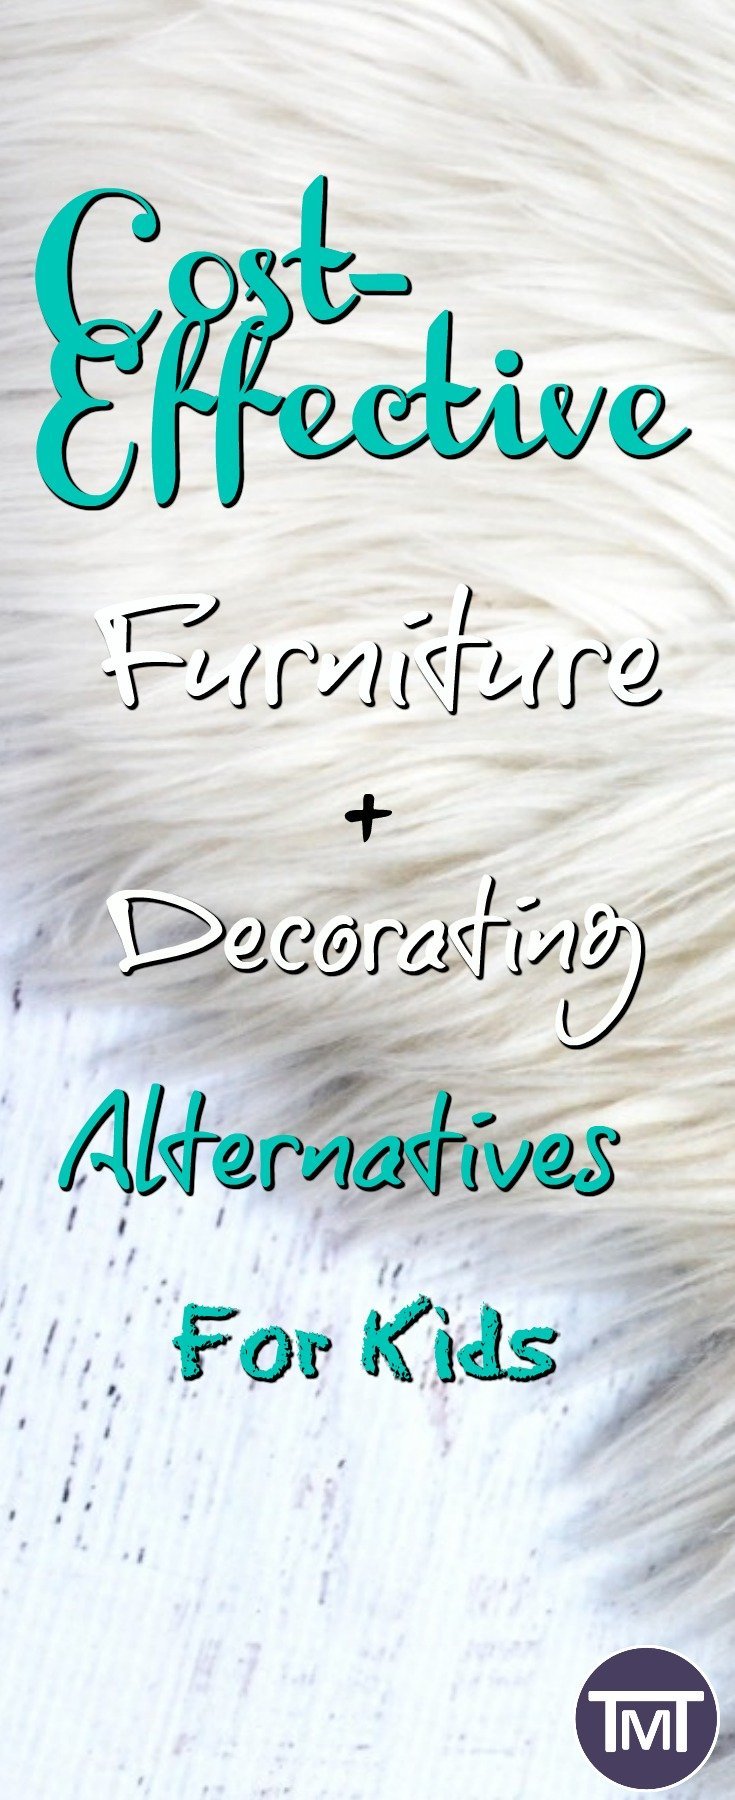 cost-effective furniture and decorating alternatives for kids